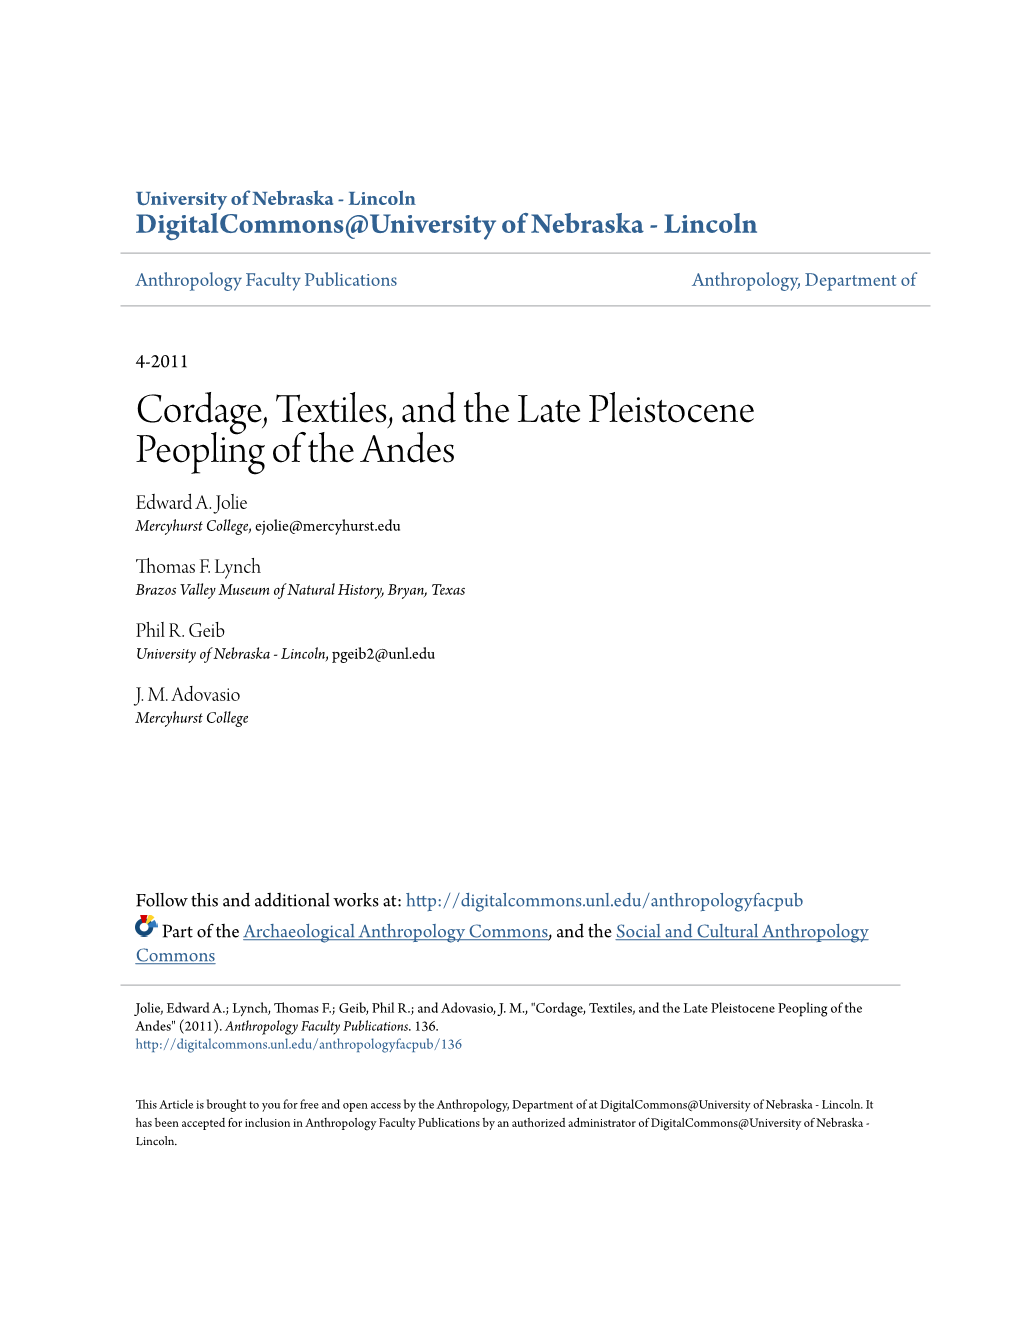 Cordage, Textiles, and the Late Pleistocene Peopling of the Andes Edward A